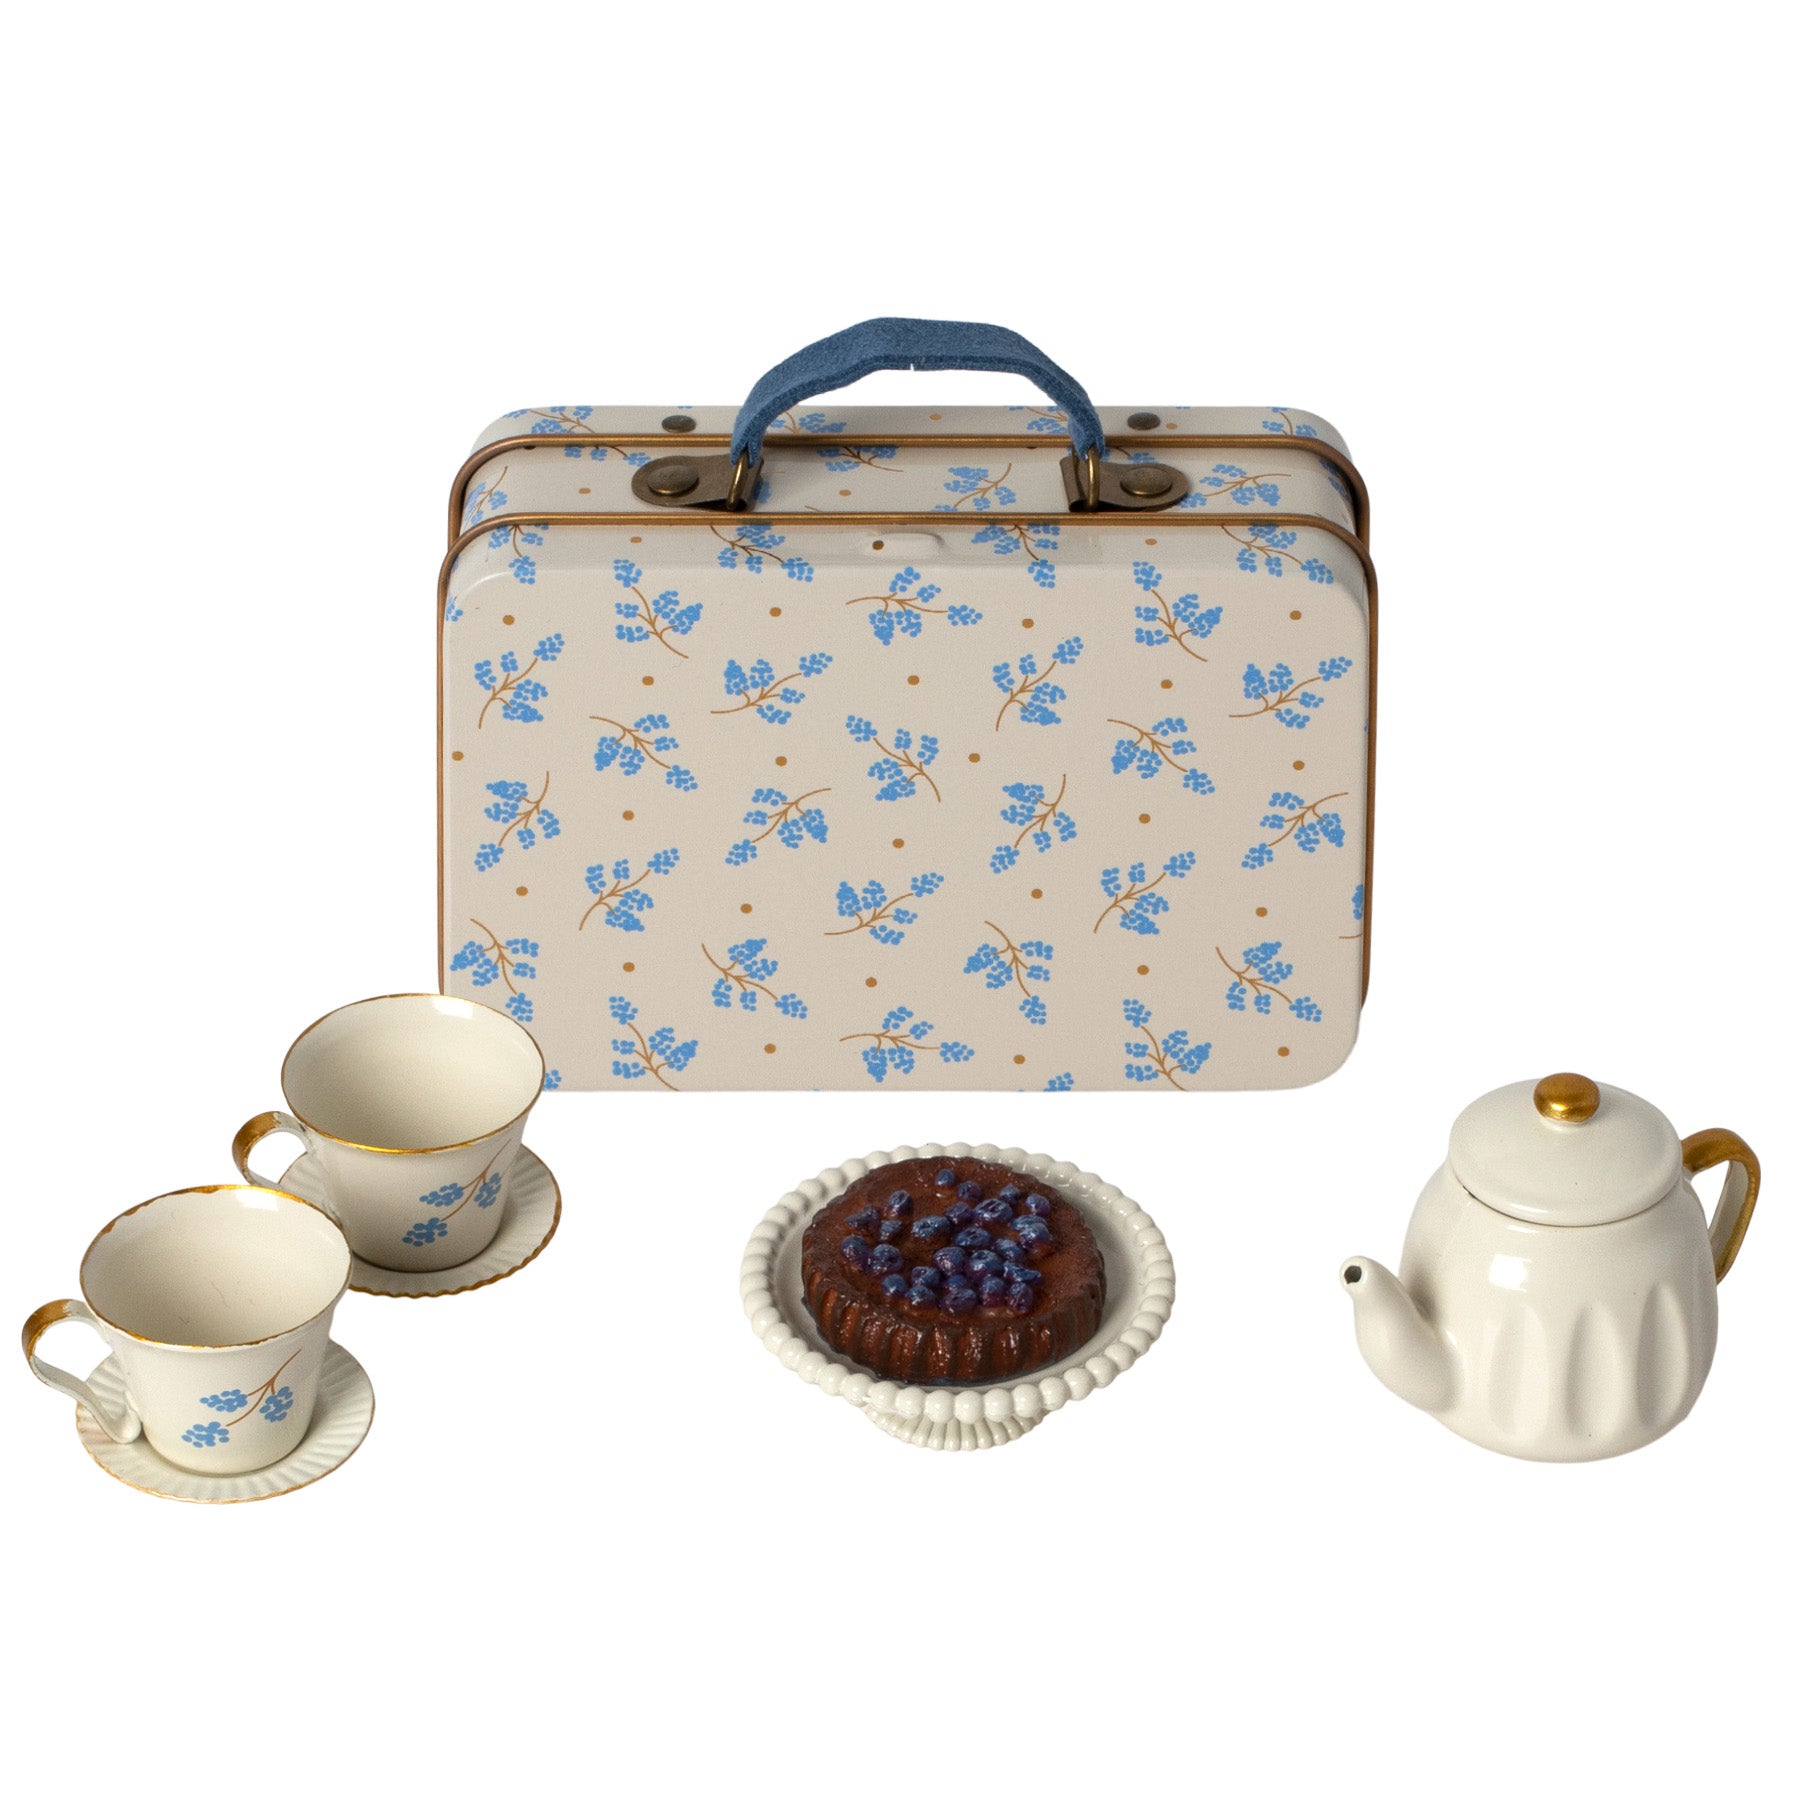 maileg miniature cream suitcase with a blue print,  containing a tea set and cakes